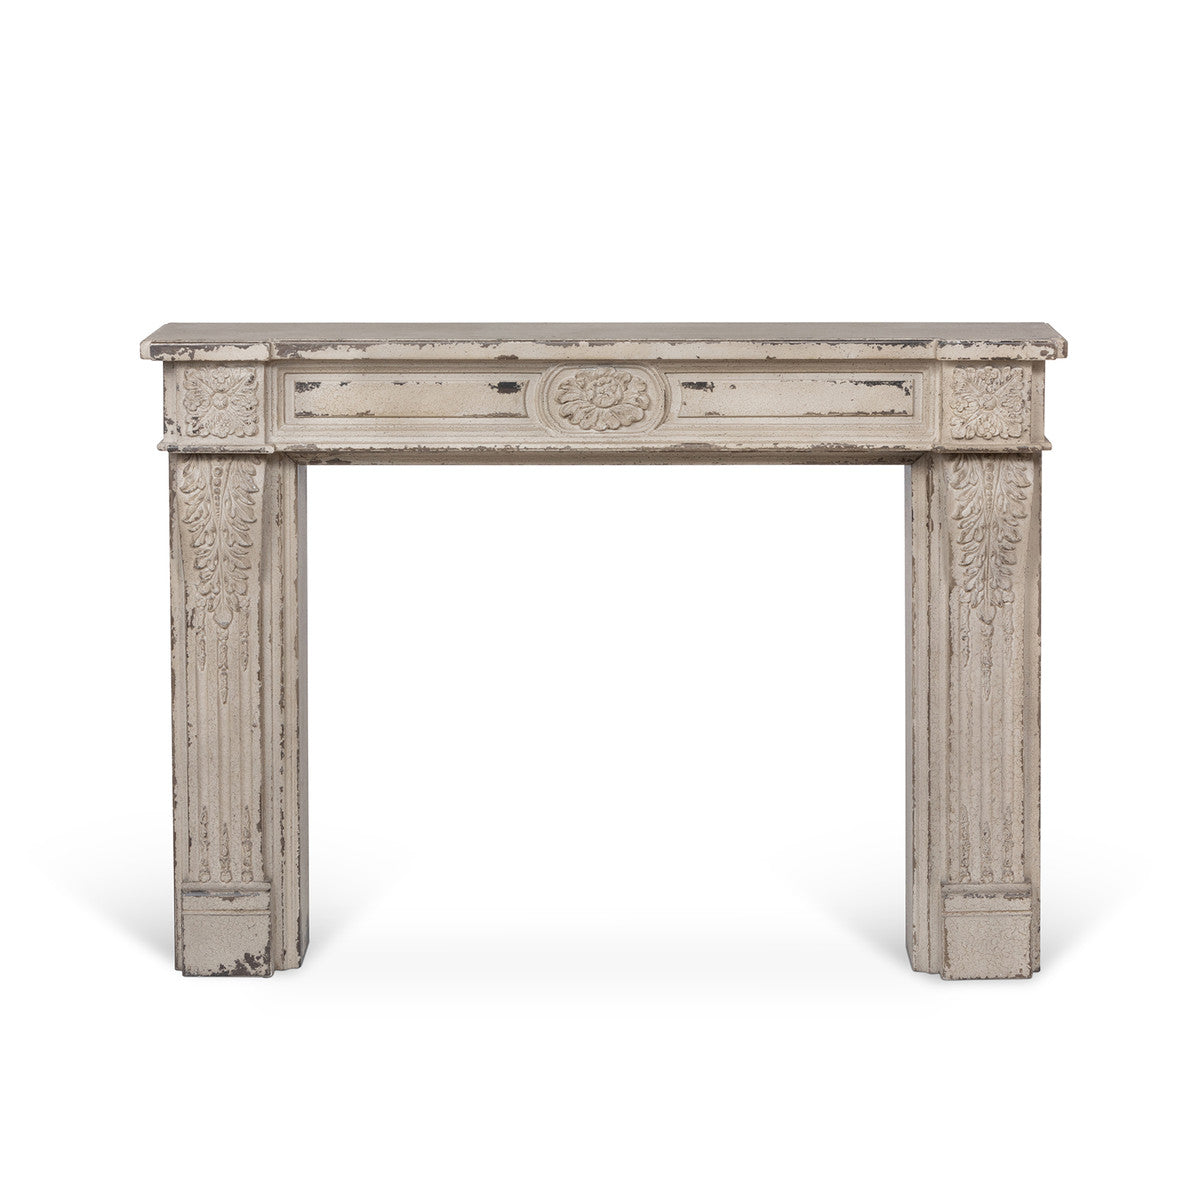 Antique White Fireplace Mantel for sale, Vintage Fireplace Surround for sale